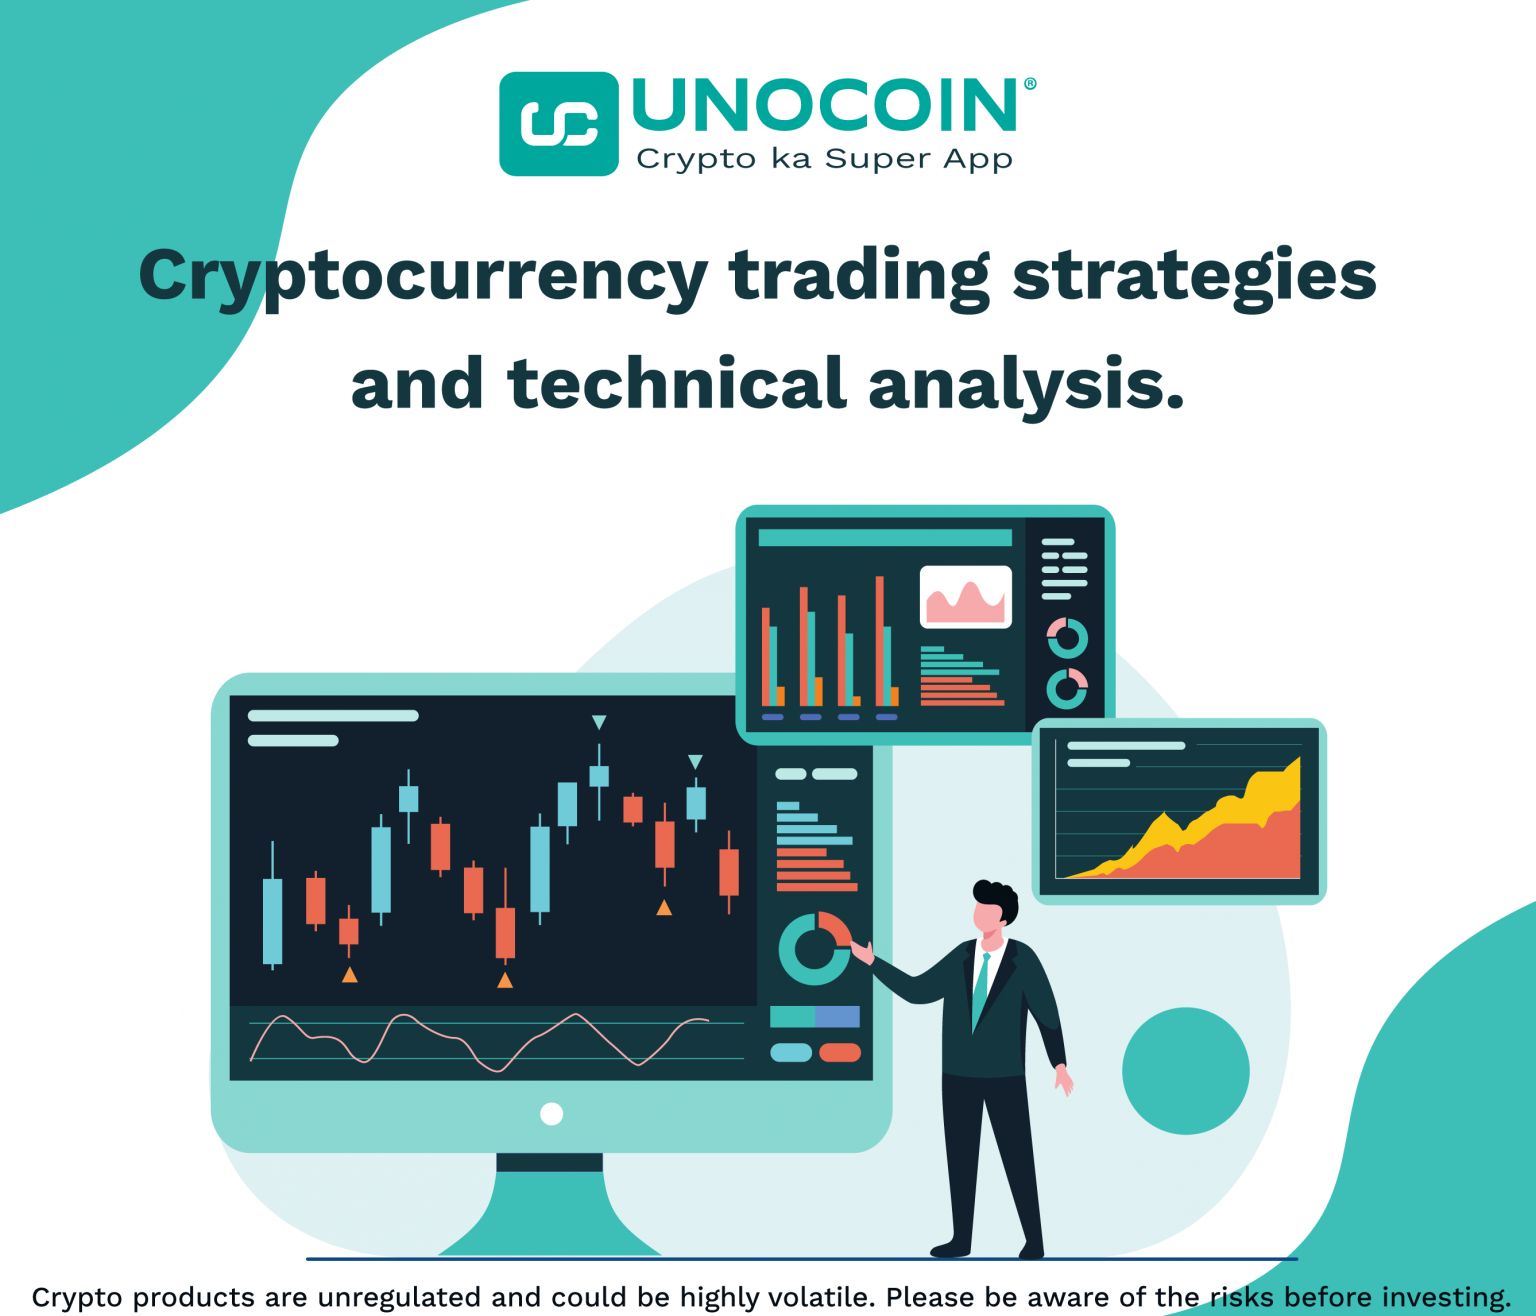 crypto technical analysis tools and techniques 2018